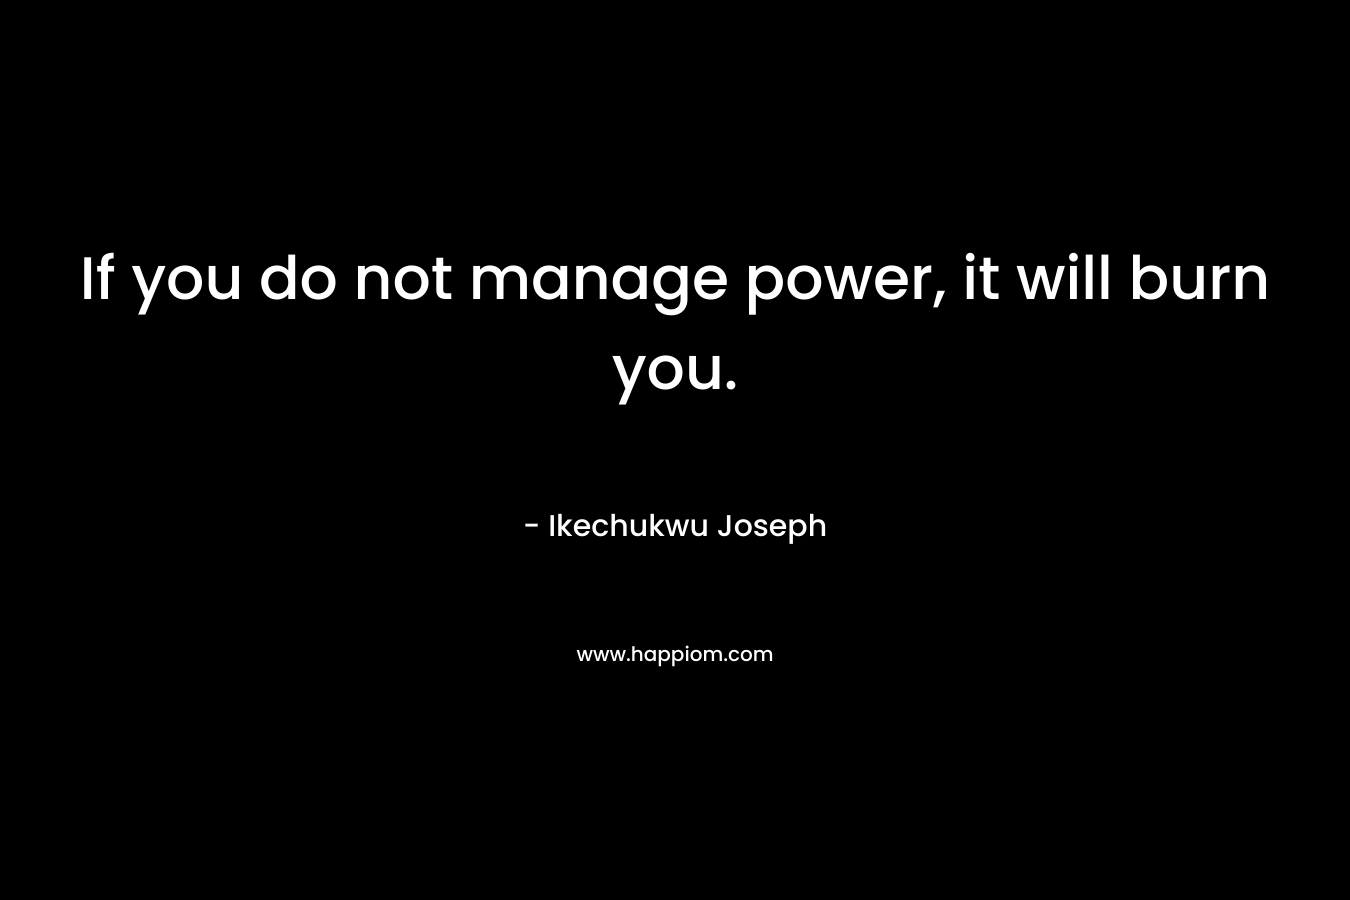 If you do not manage power, it will burn you.